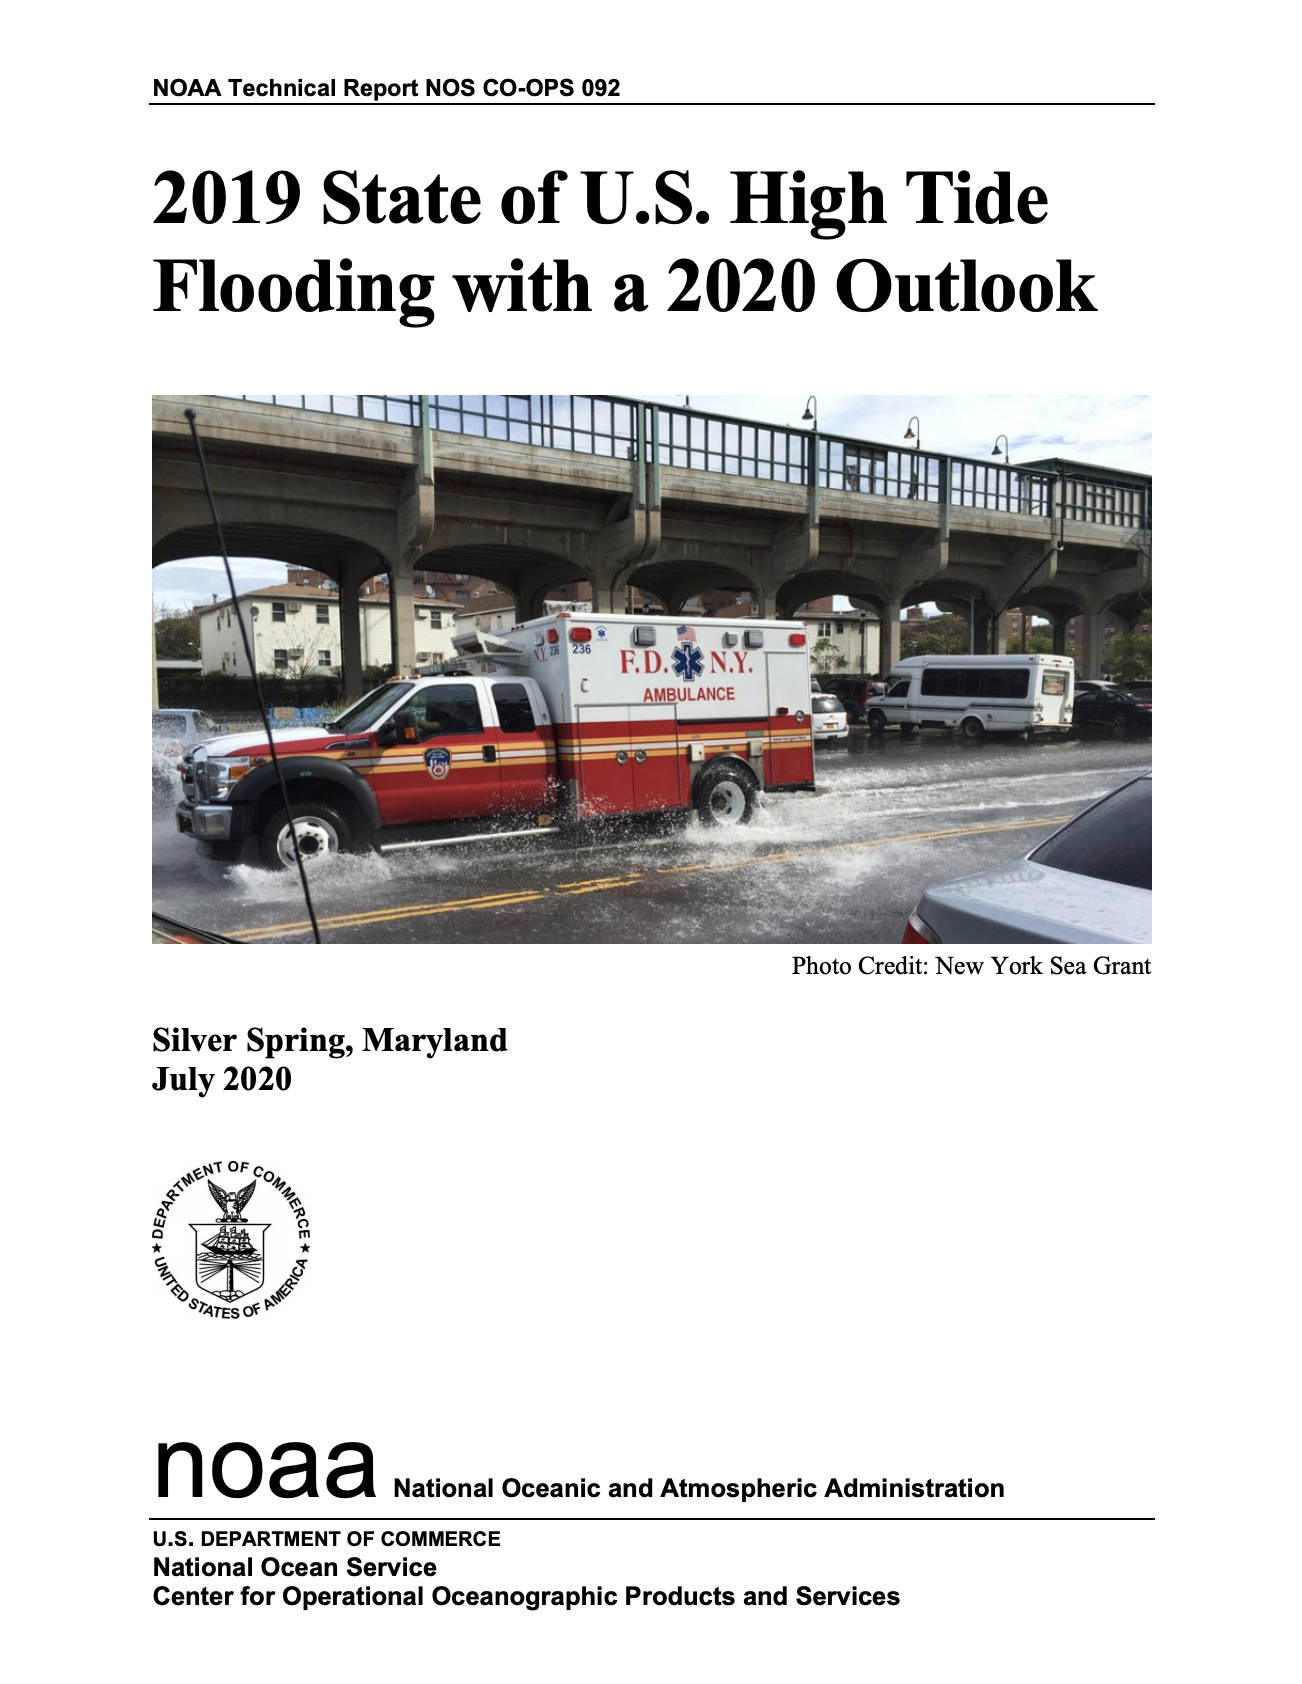 The State of High Tide Flooding and Annual Outlook